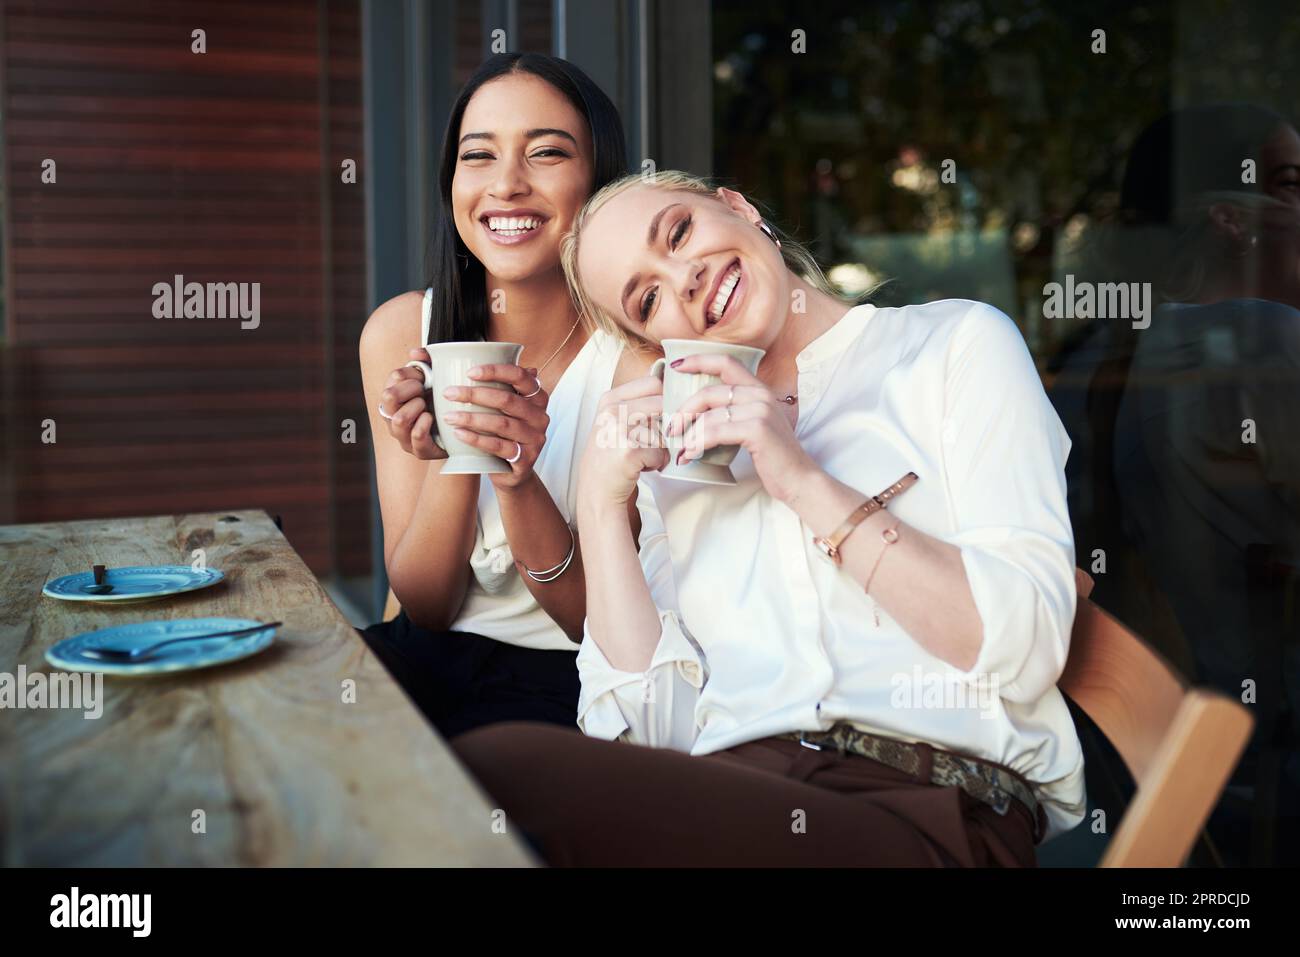 All you need is a good friend and good coffee. two young woman enjoying each others company while having coffee at a cafe. Stock Photo